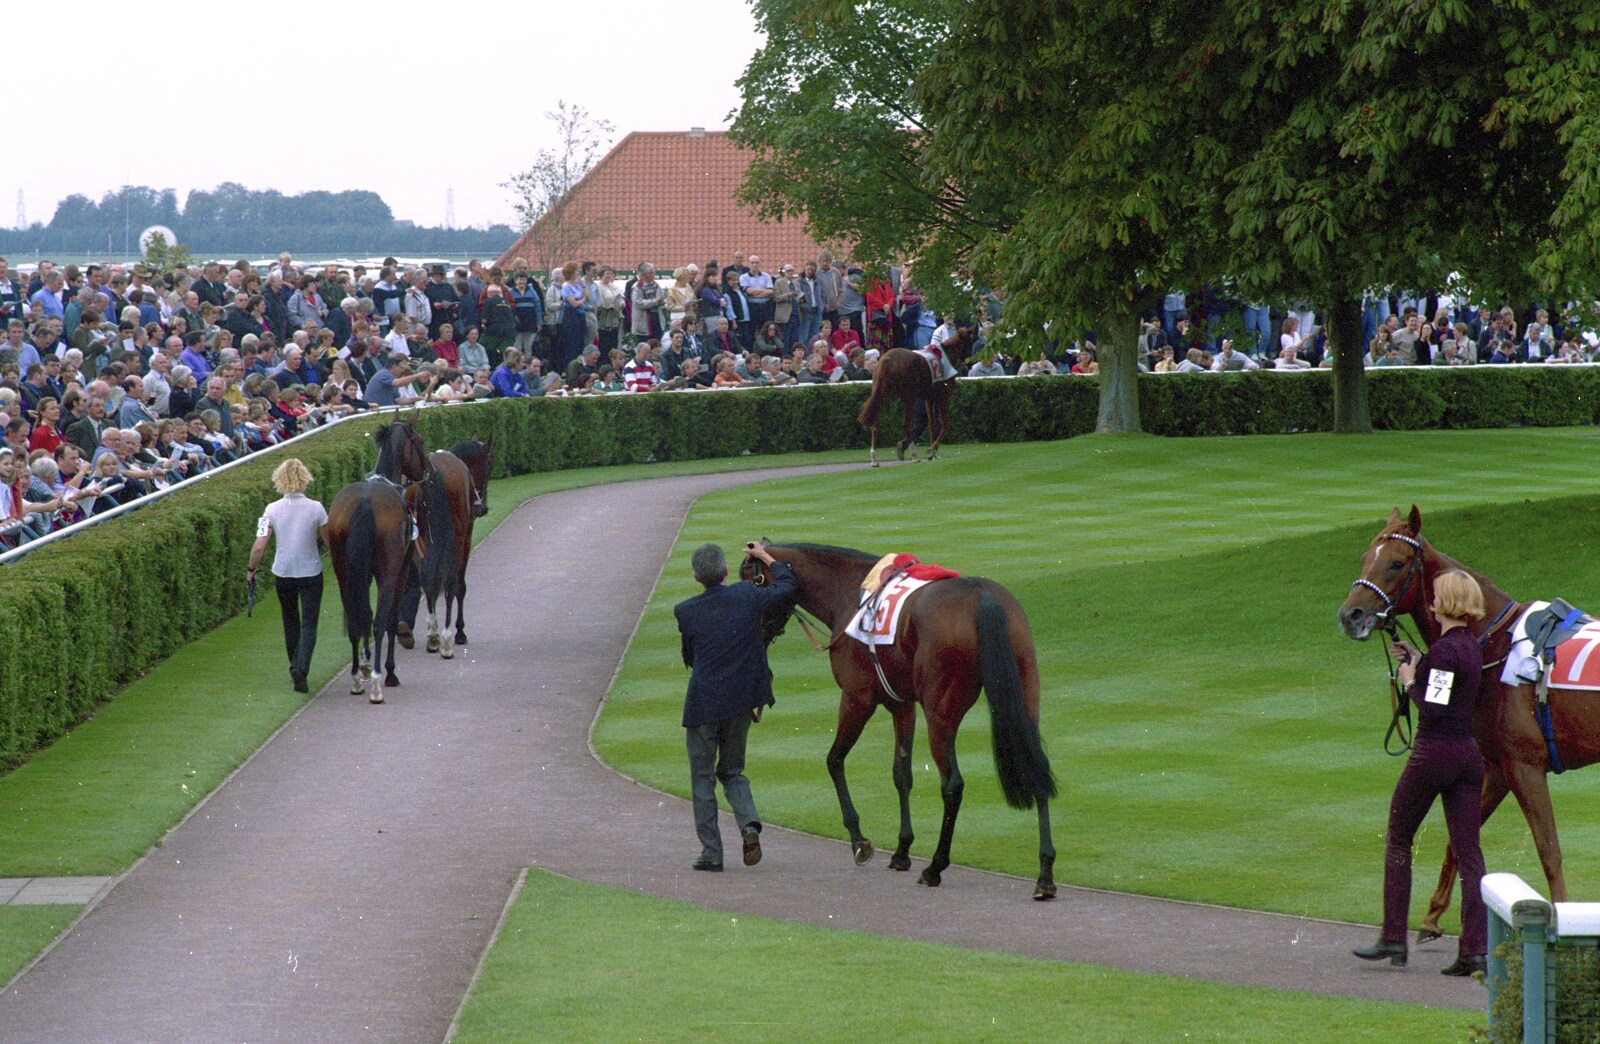 More horse-parading from 3G Lab Goes to the Races, Newmarket, Suffolk - 15th July 2001